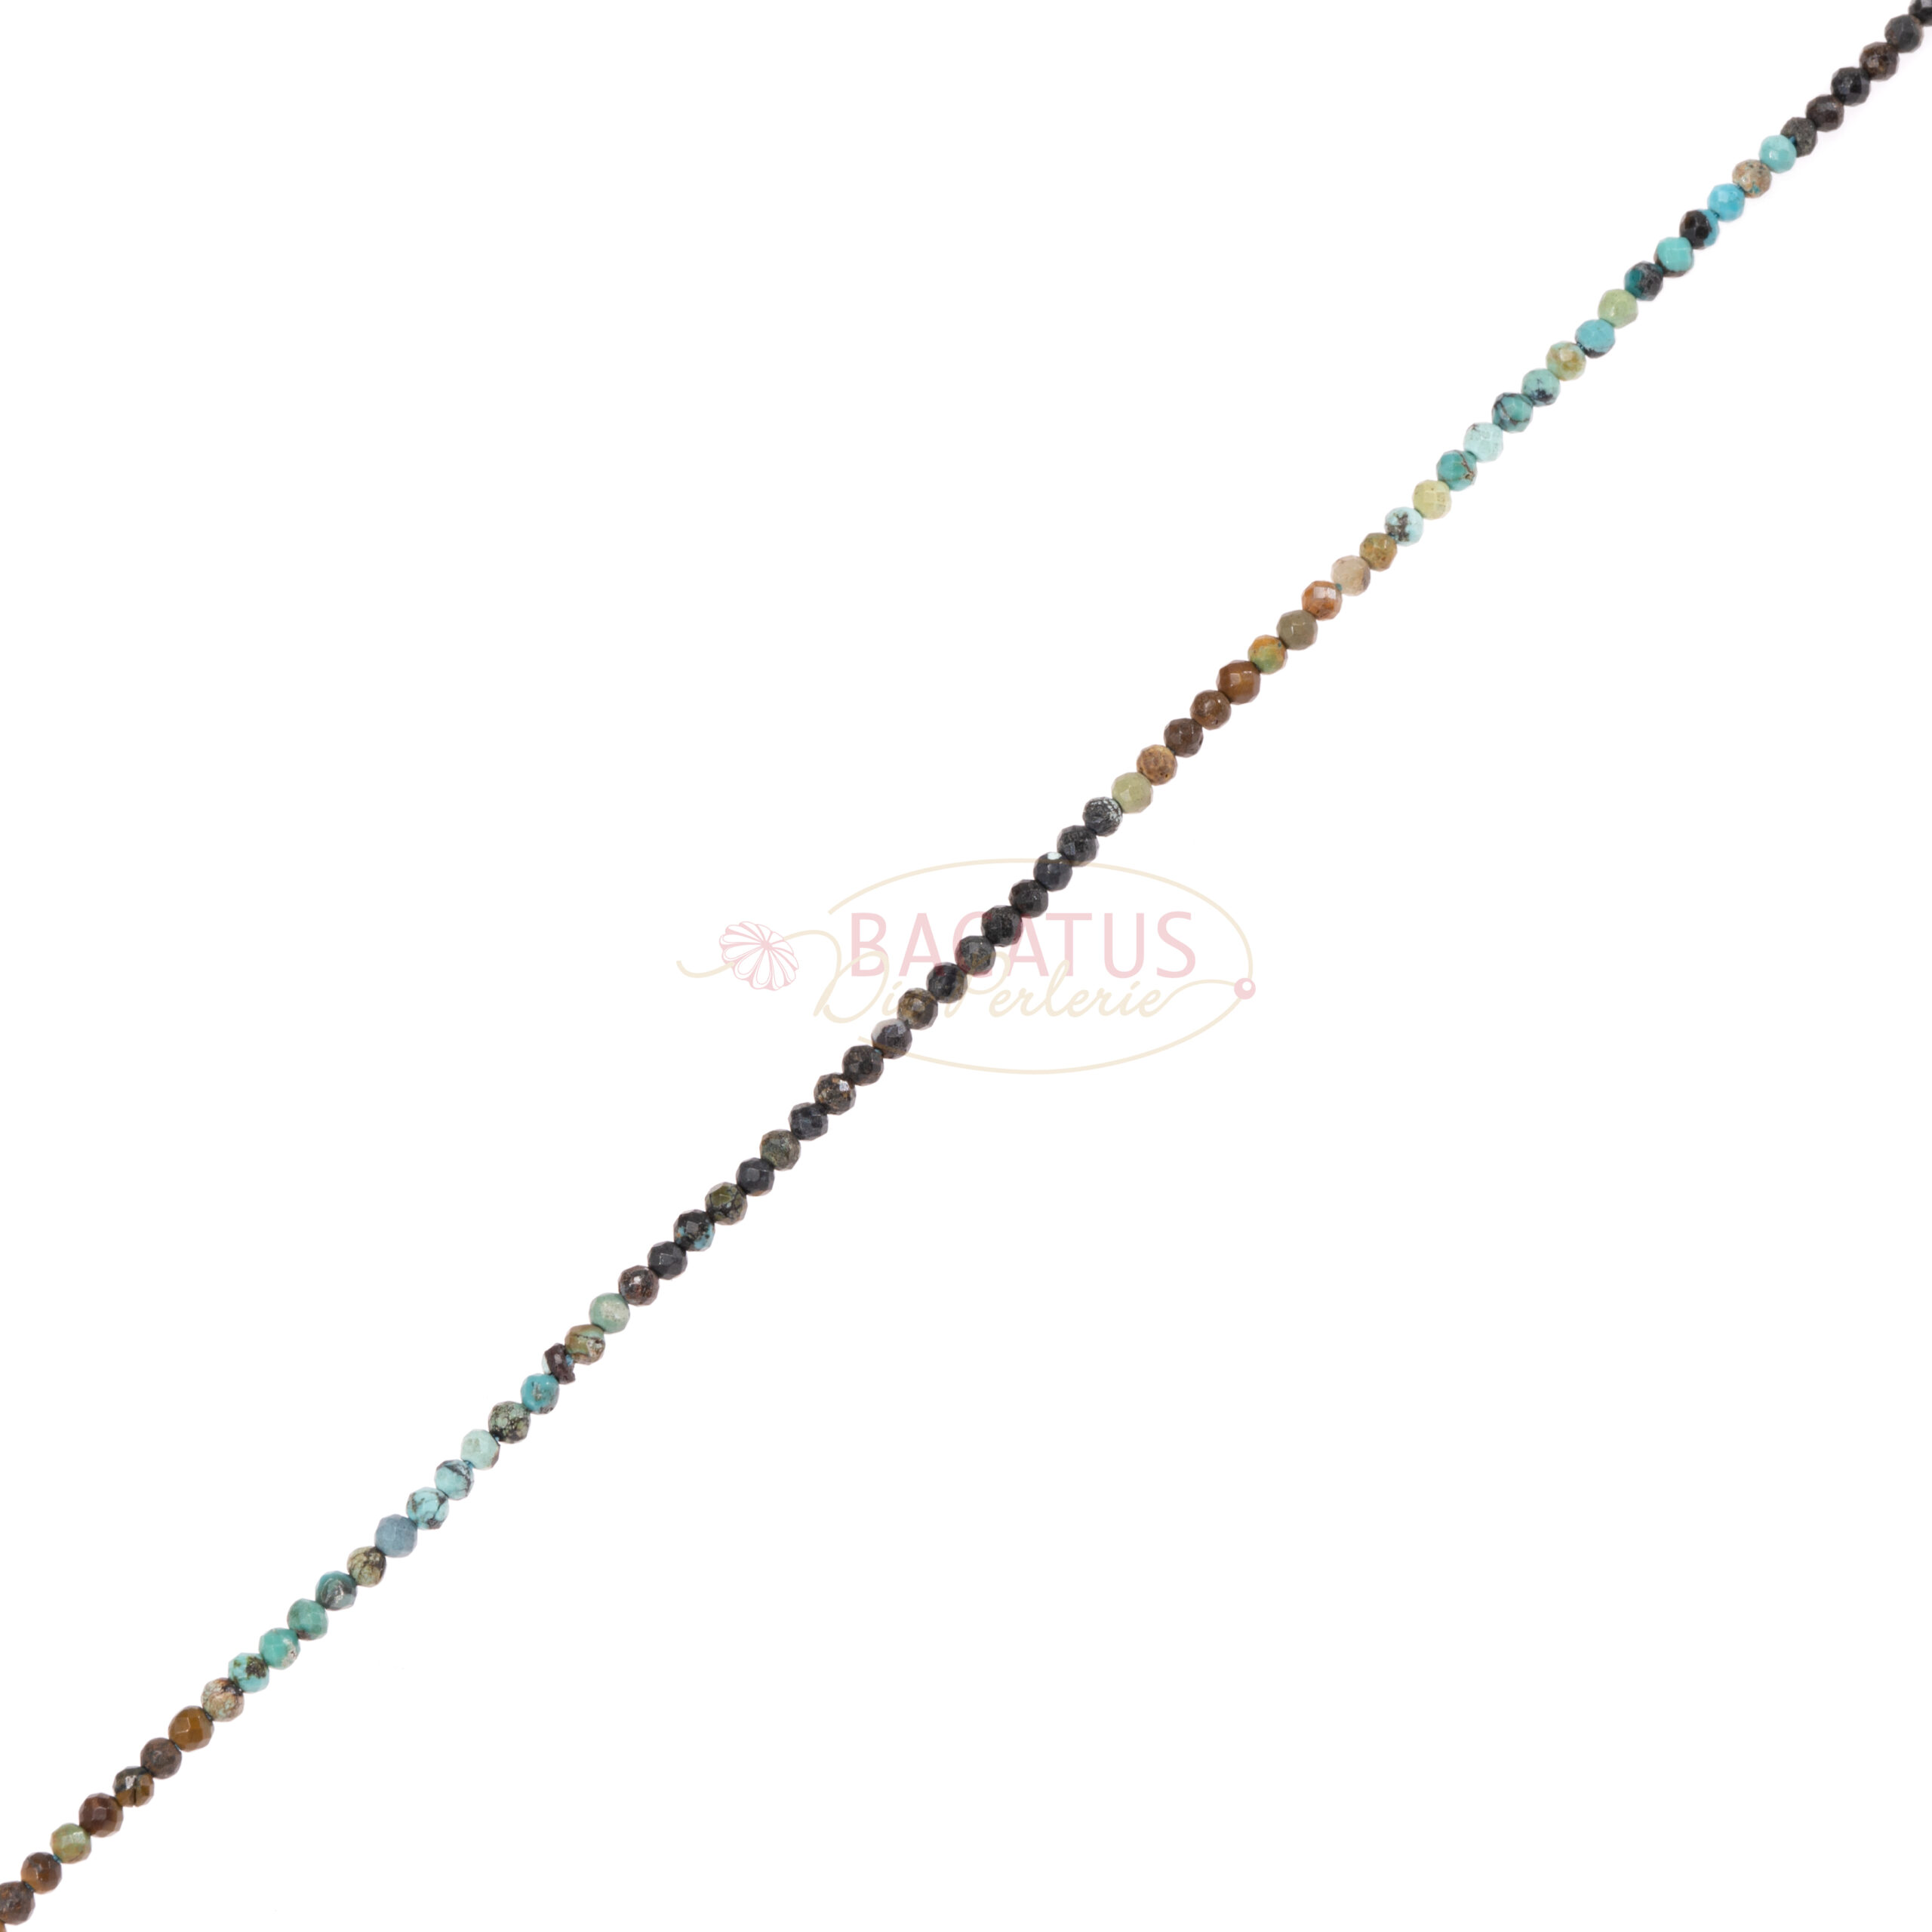 Ombre turquoise faceted plain round approx. 2mm, 1 strand